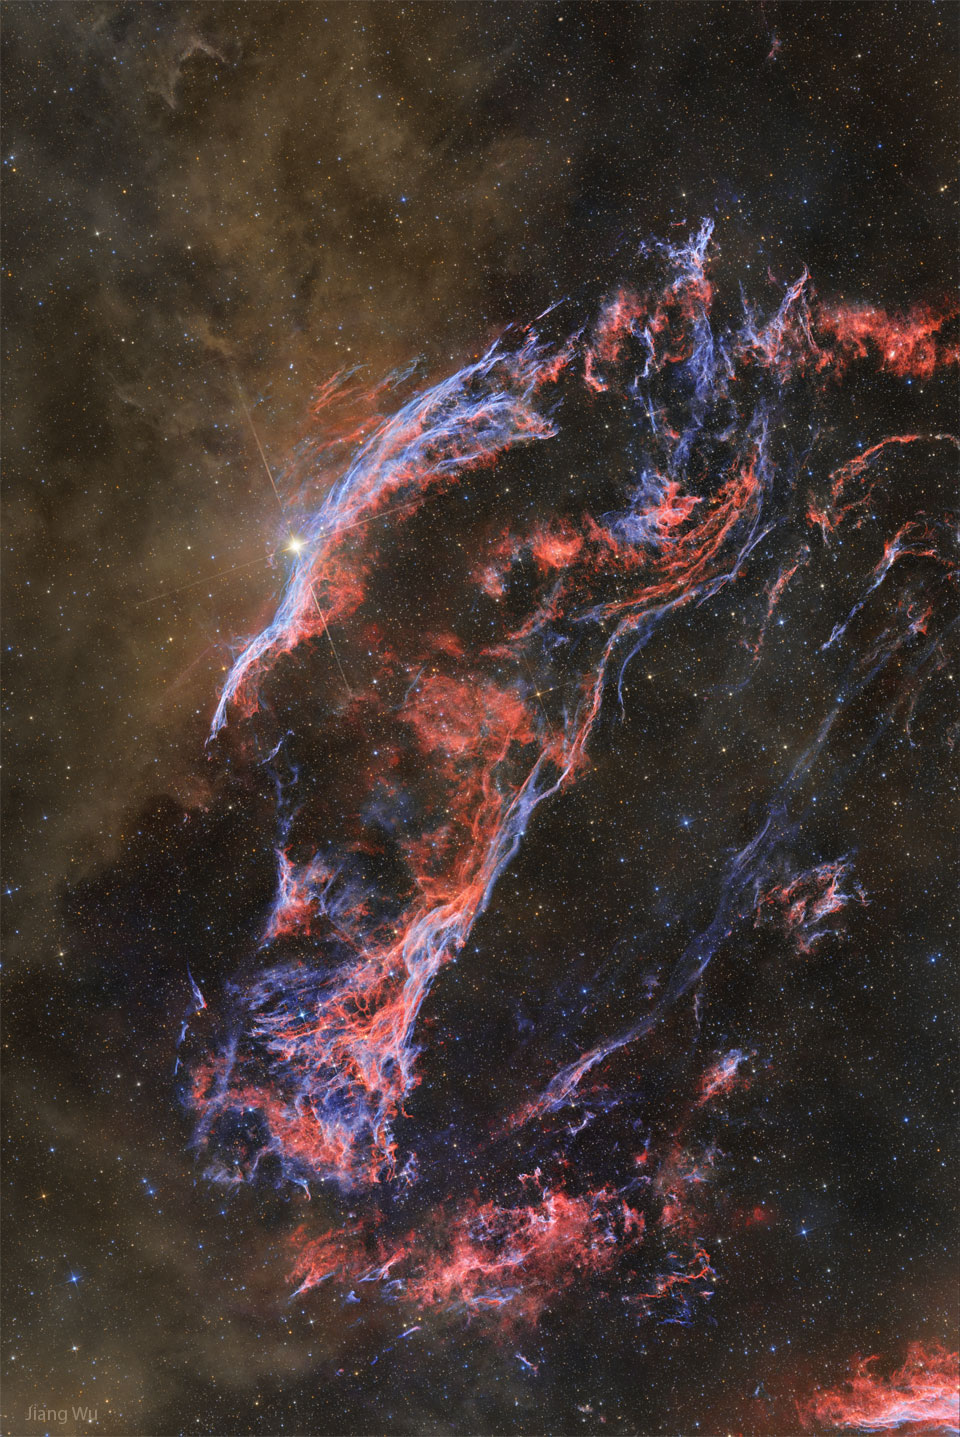 Brown glowing dust appears to the left of the blue and 
red filamentary gas that composes the western edge of the
Veil Nebula, a supernova remnant. 
Please see the explanation for more detailed information.